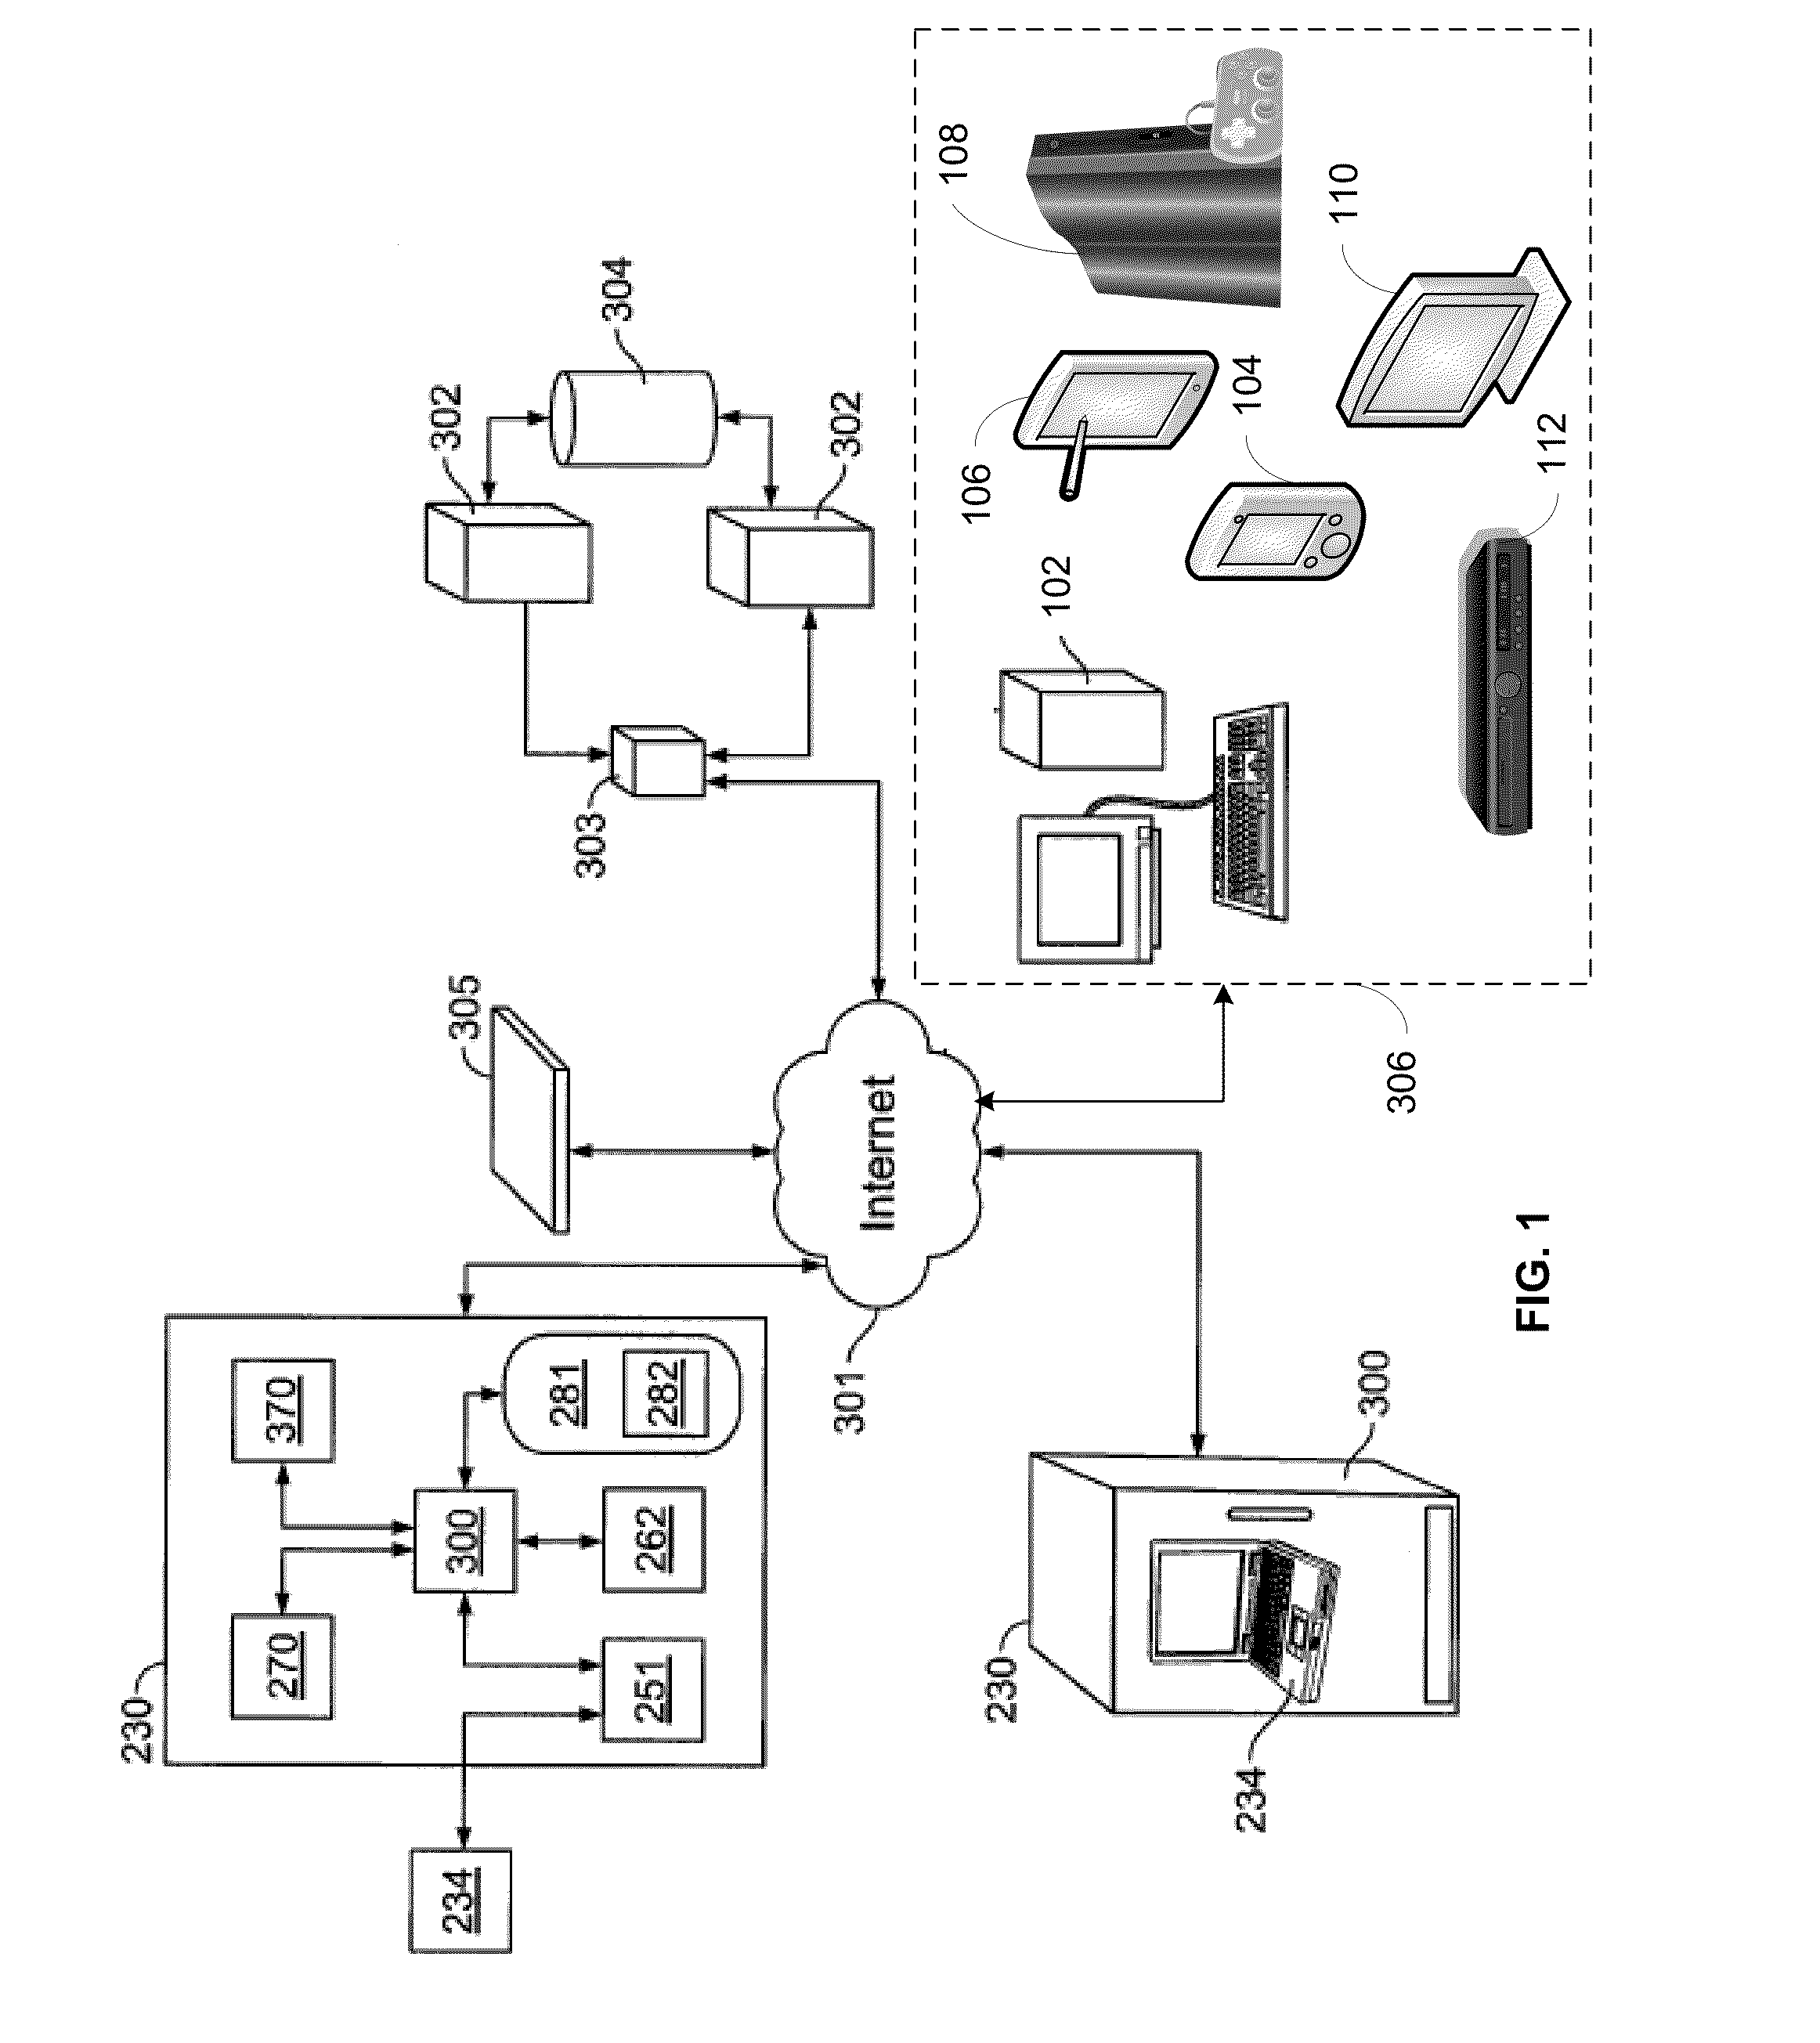 System and method for applying parental control limits from content providers to media content